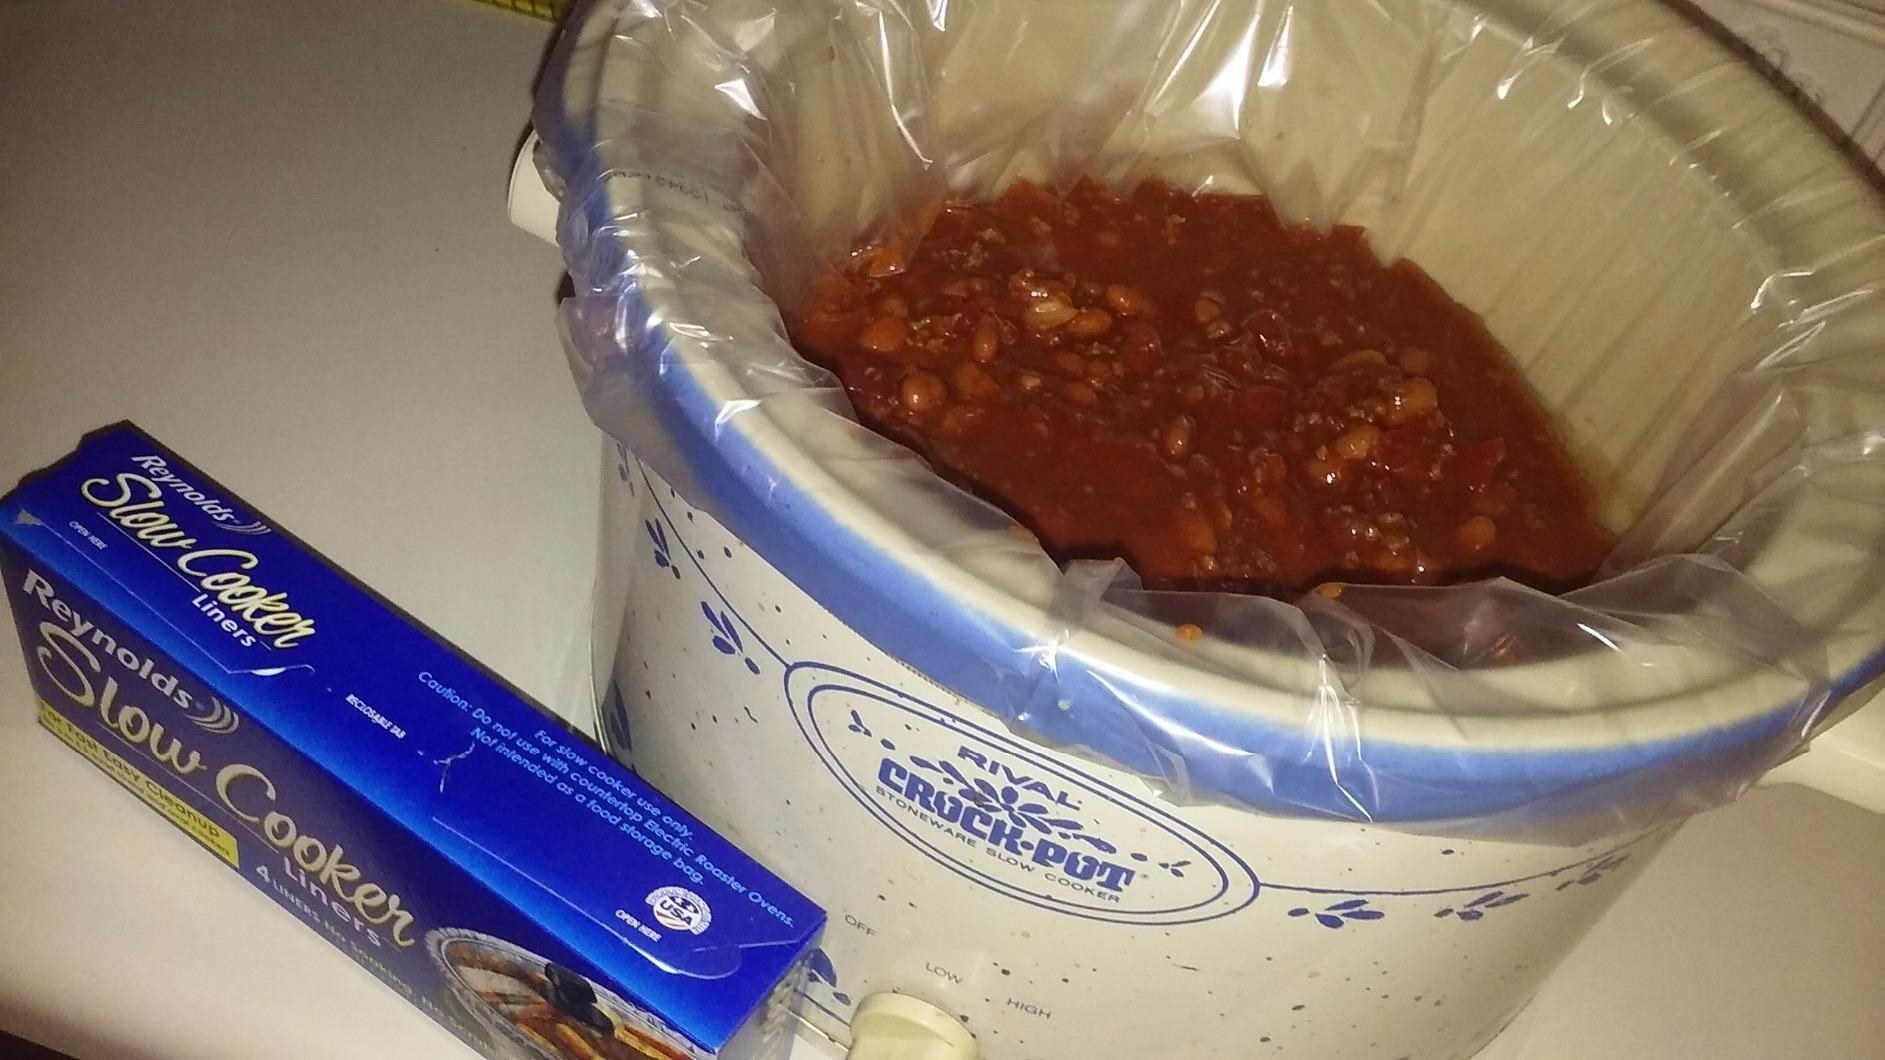 Reviewer image of liner inside crockpot with food in it